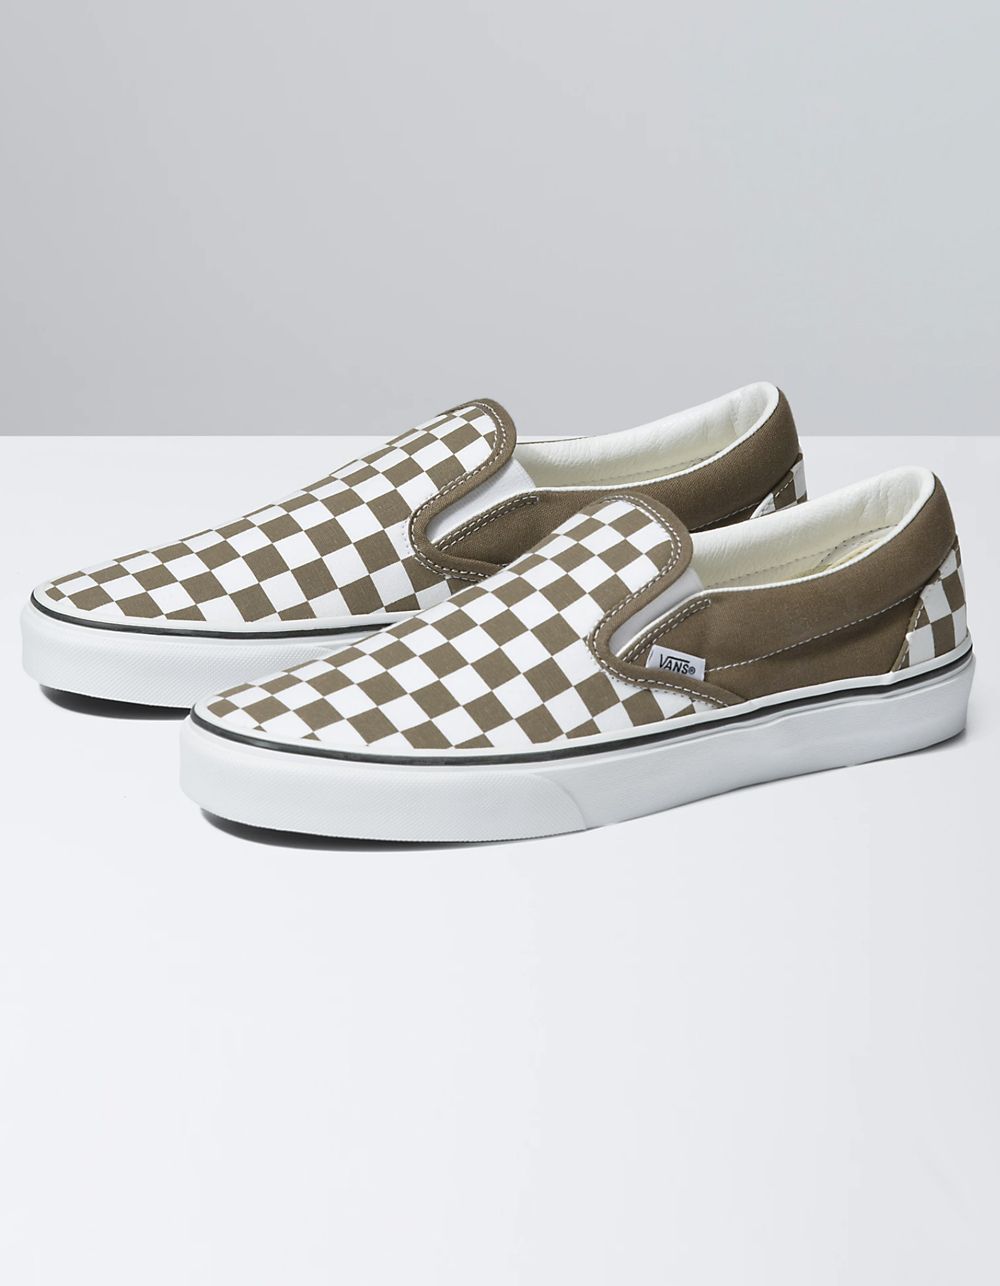 VANS Checkerboard Classic Slip-On Shoes | Tillys